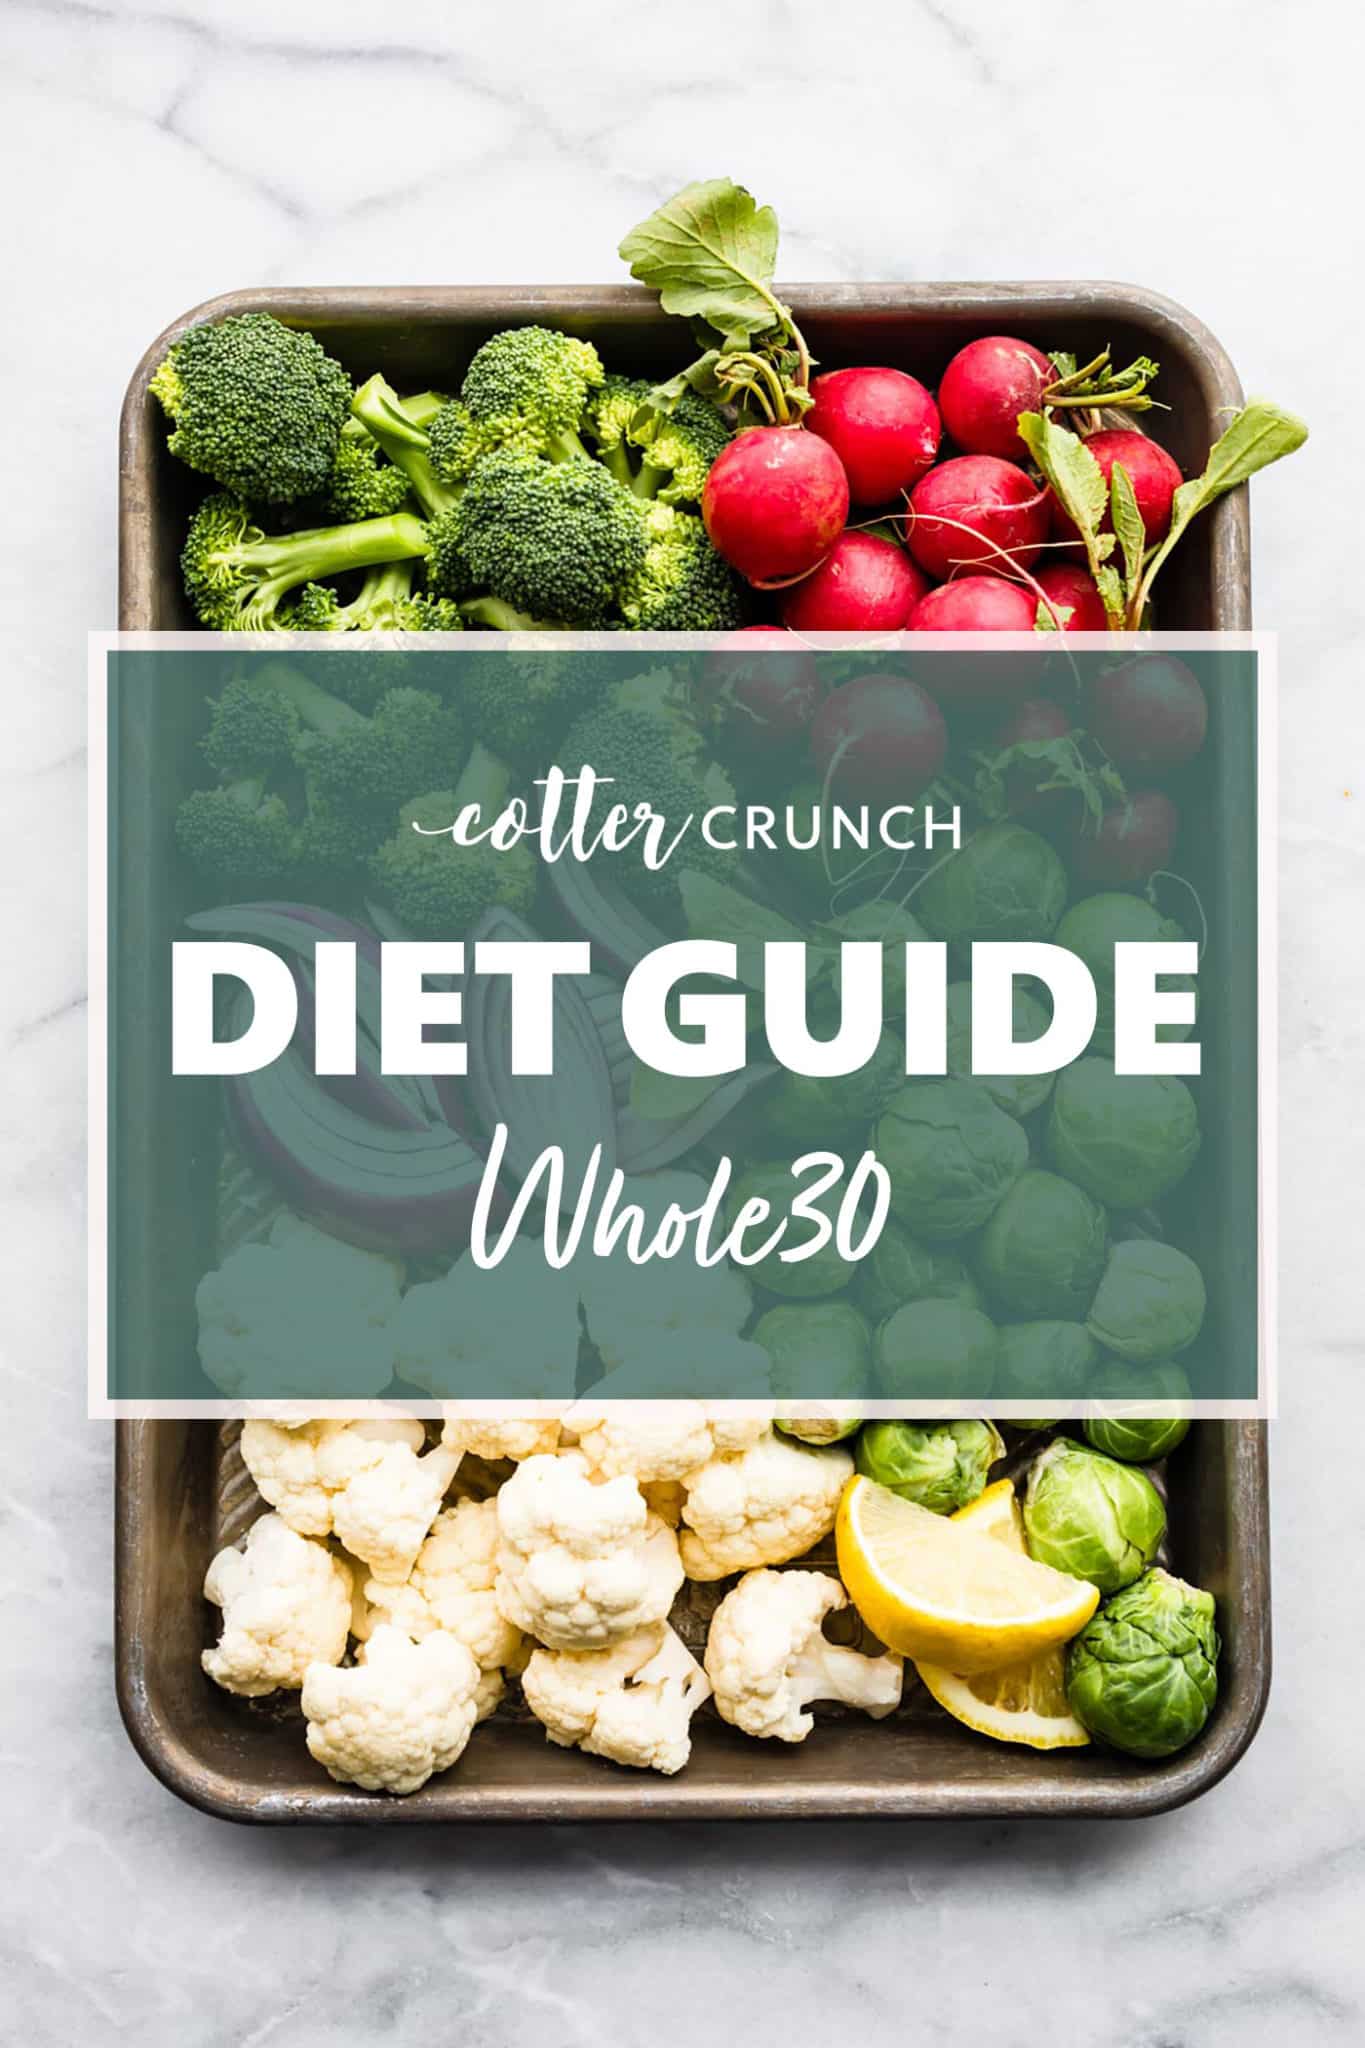 The Whole30 Diet Guide - Cotter Crunch